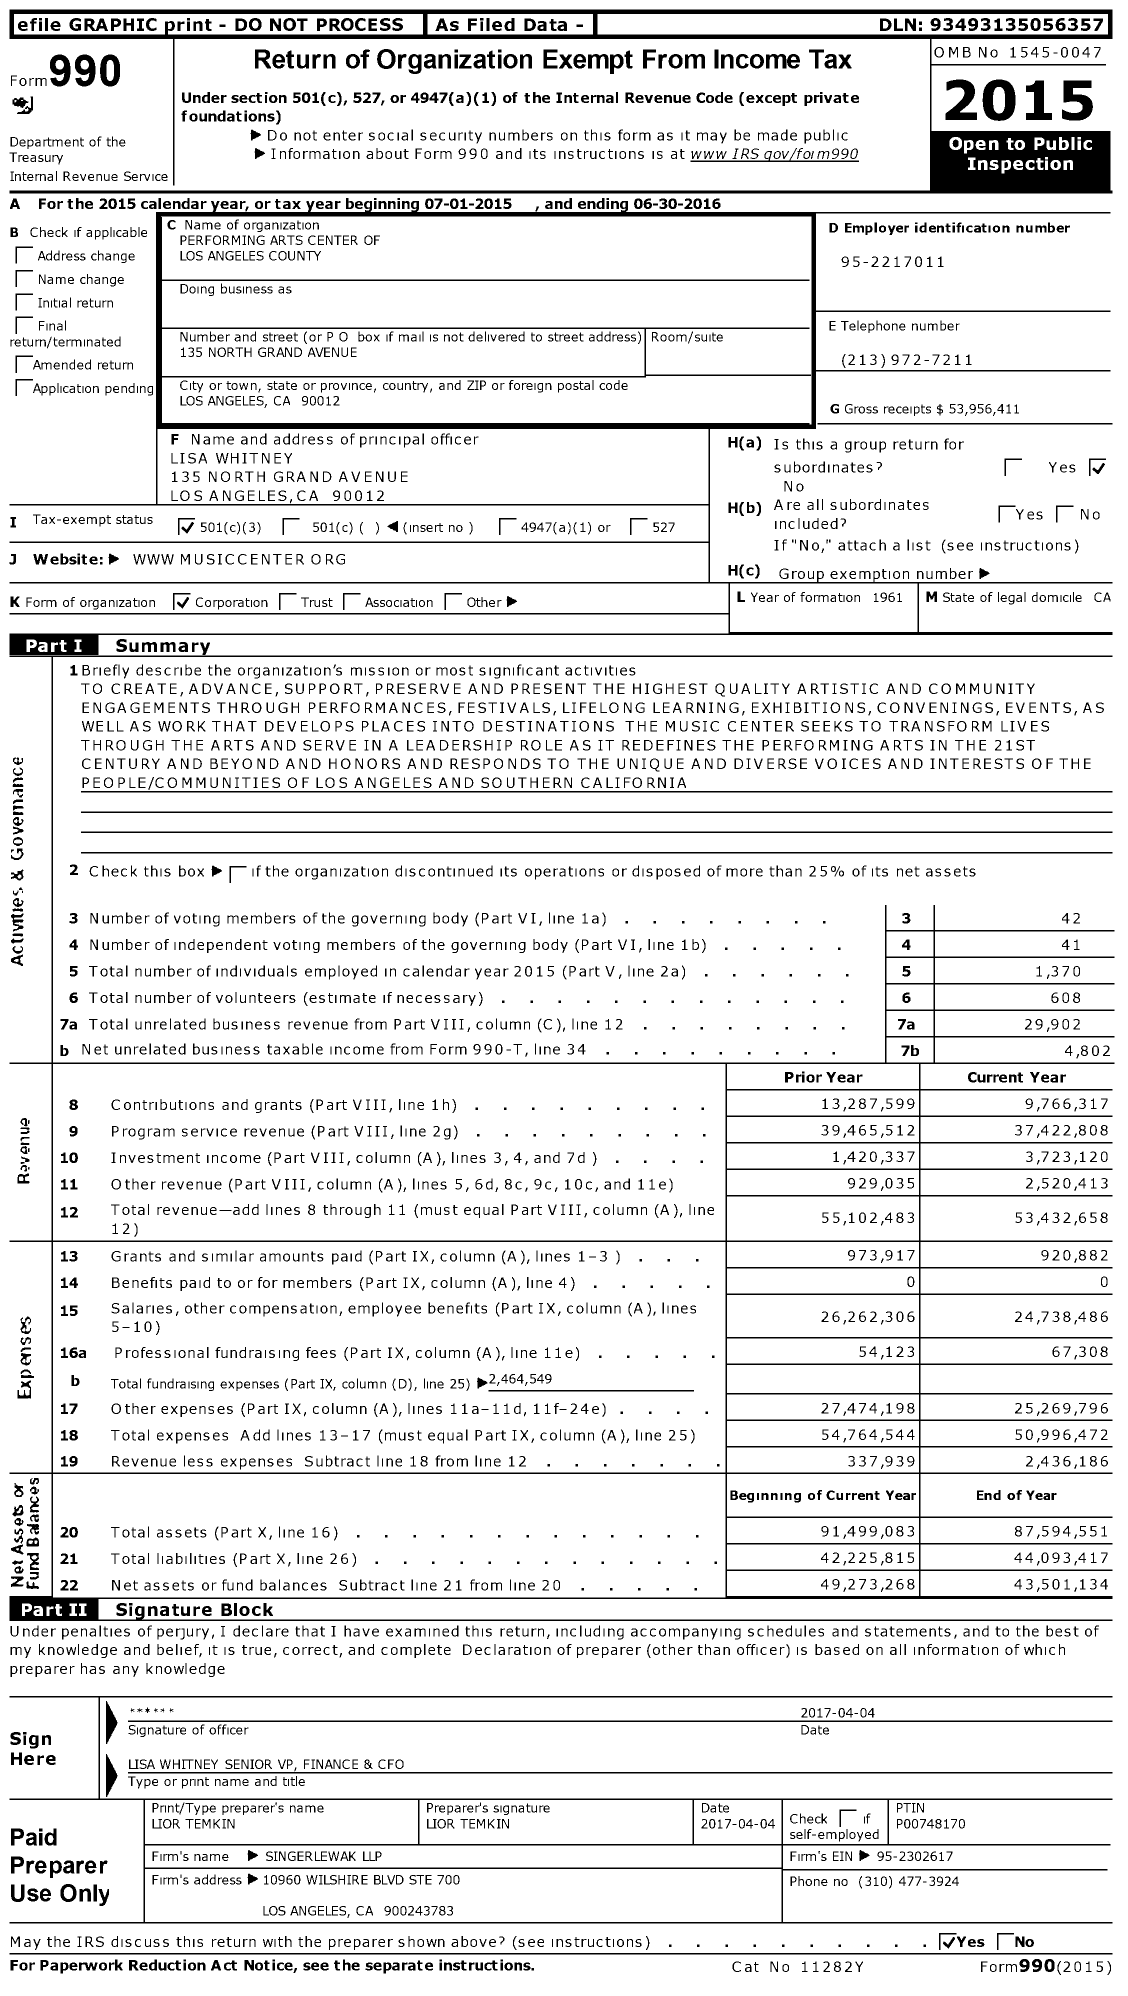 Image of first page of 2015 Form 990 for The Music Center (TMC)